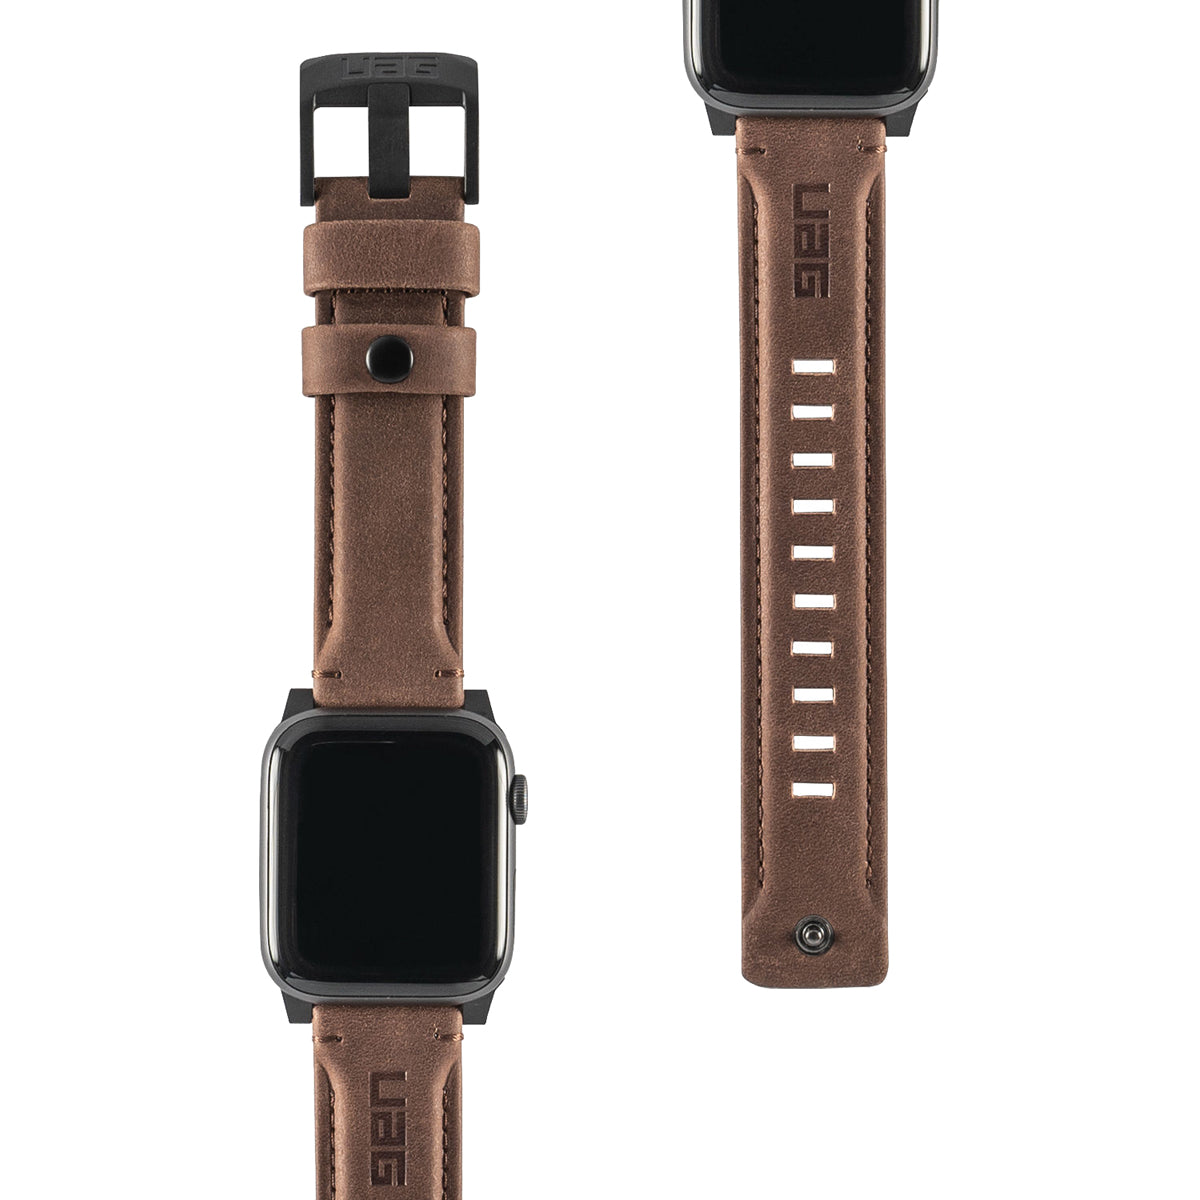 UAG Apple Watch 42mm/44mm Leather Strap - Brown.